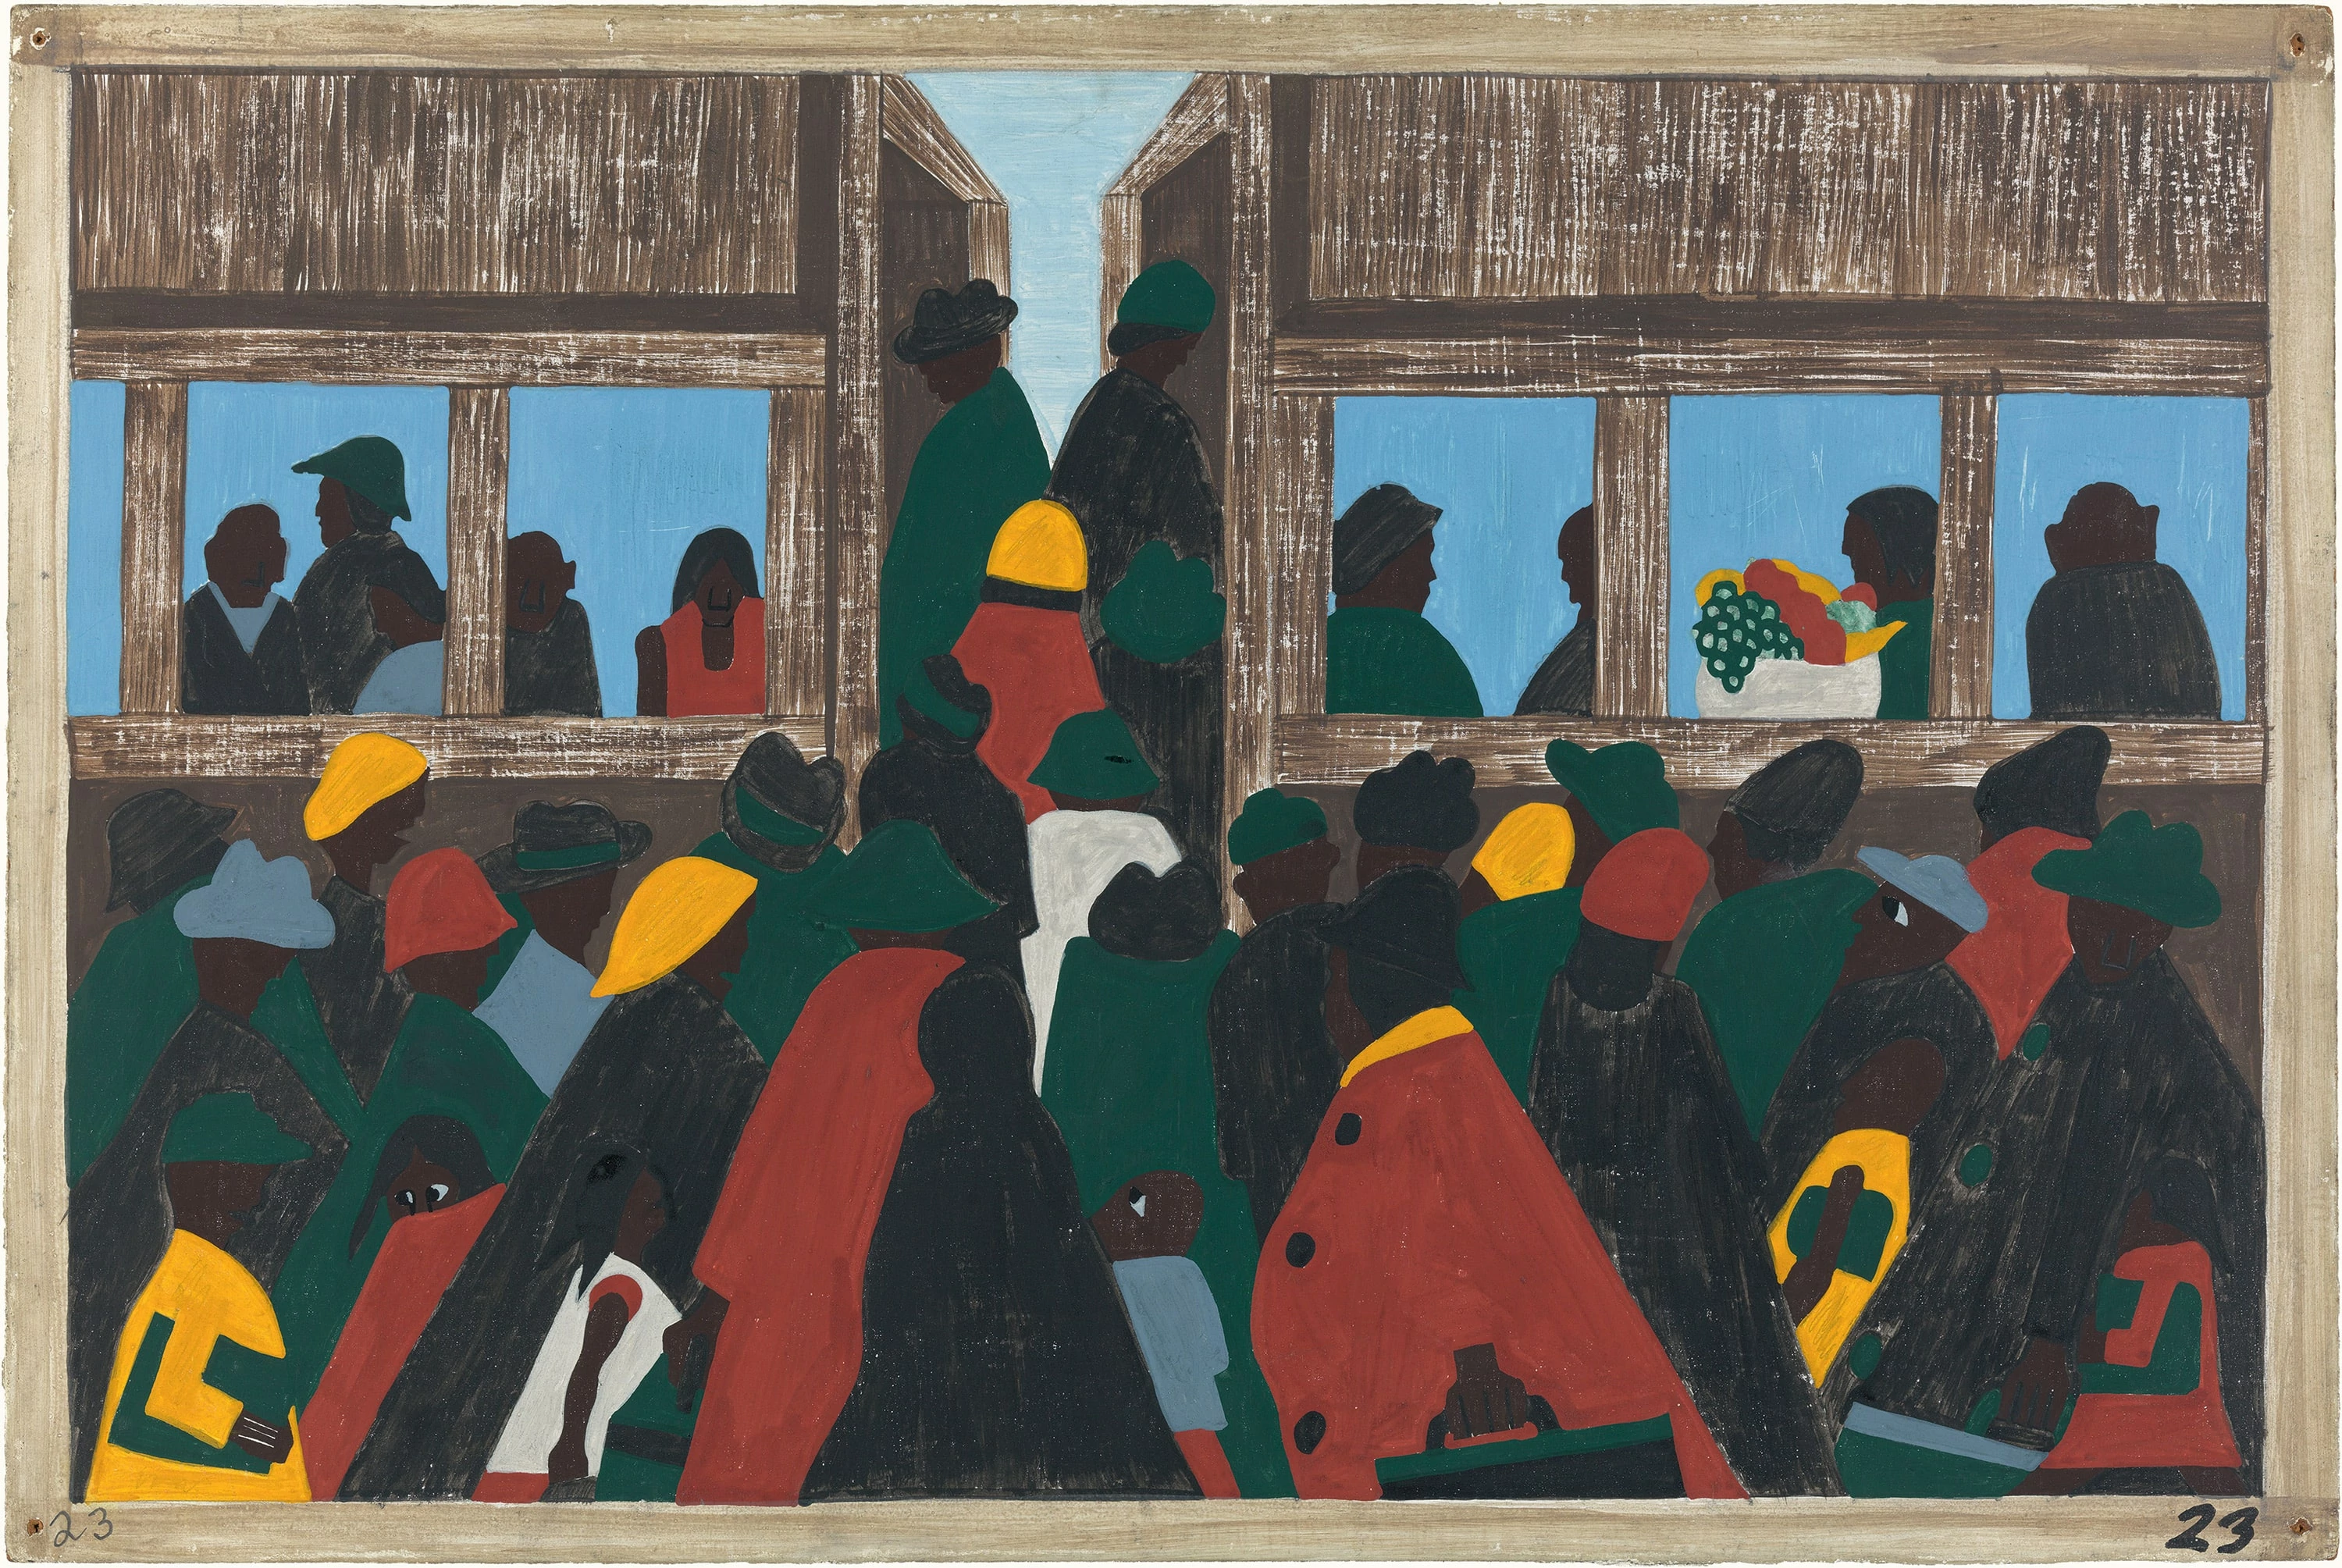 Migration Series No.23: The migration spread, Jacob Lawrence